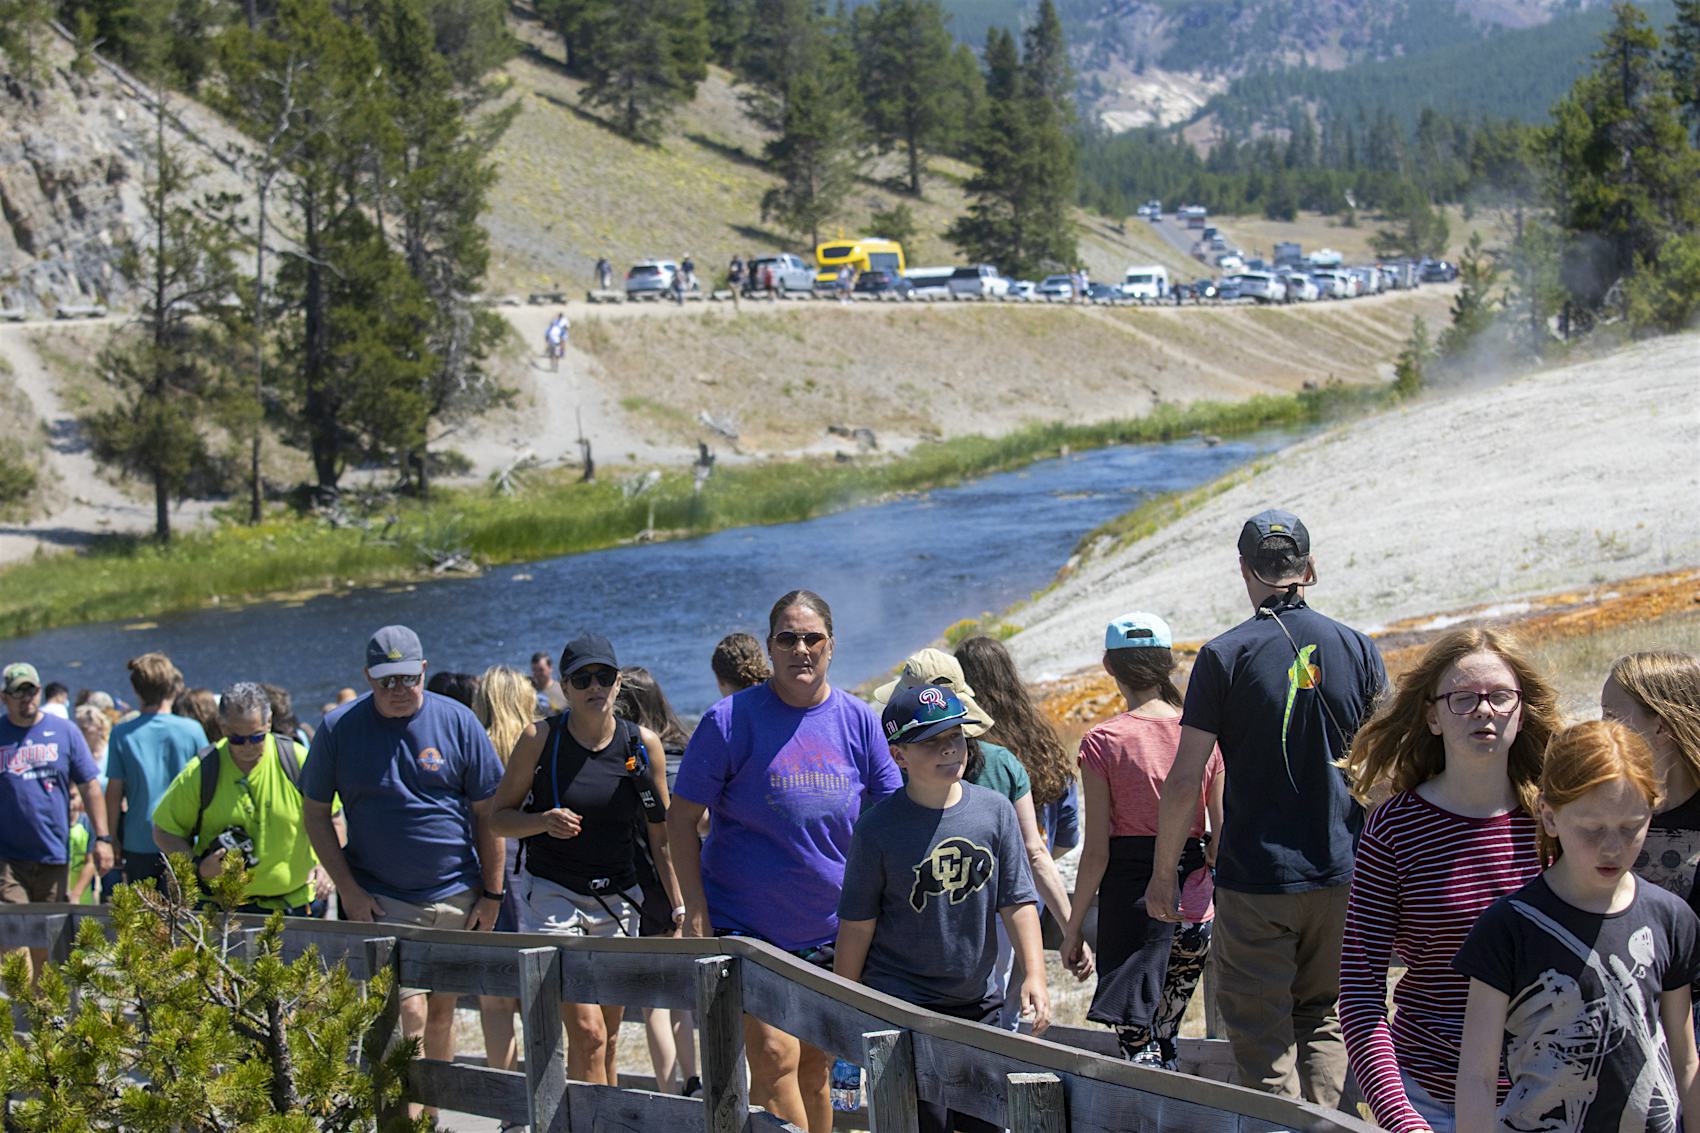 Long lines of people and cars waiting for entry to a US national park